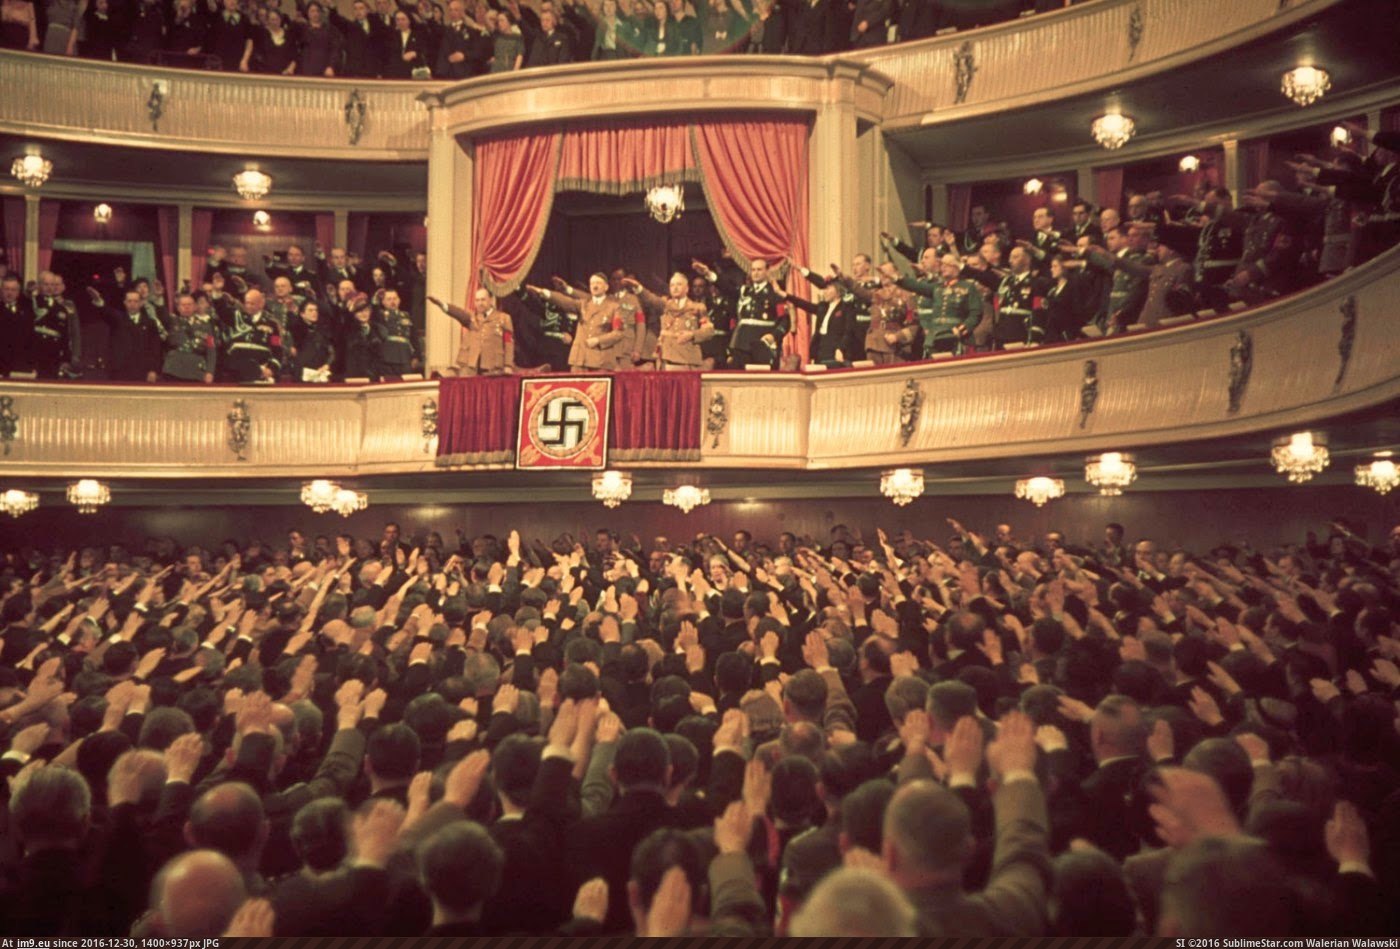 Adolf Hitler and Joseph Goebbels (in box) at Charlottenburg Theatre, Berlin, 1939. (in Restored Photos of Nazi Germany)